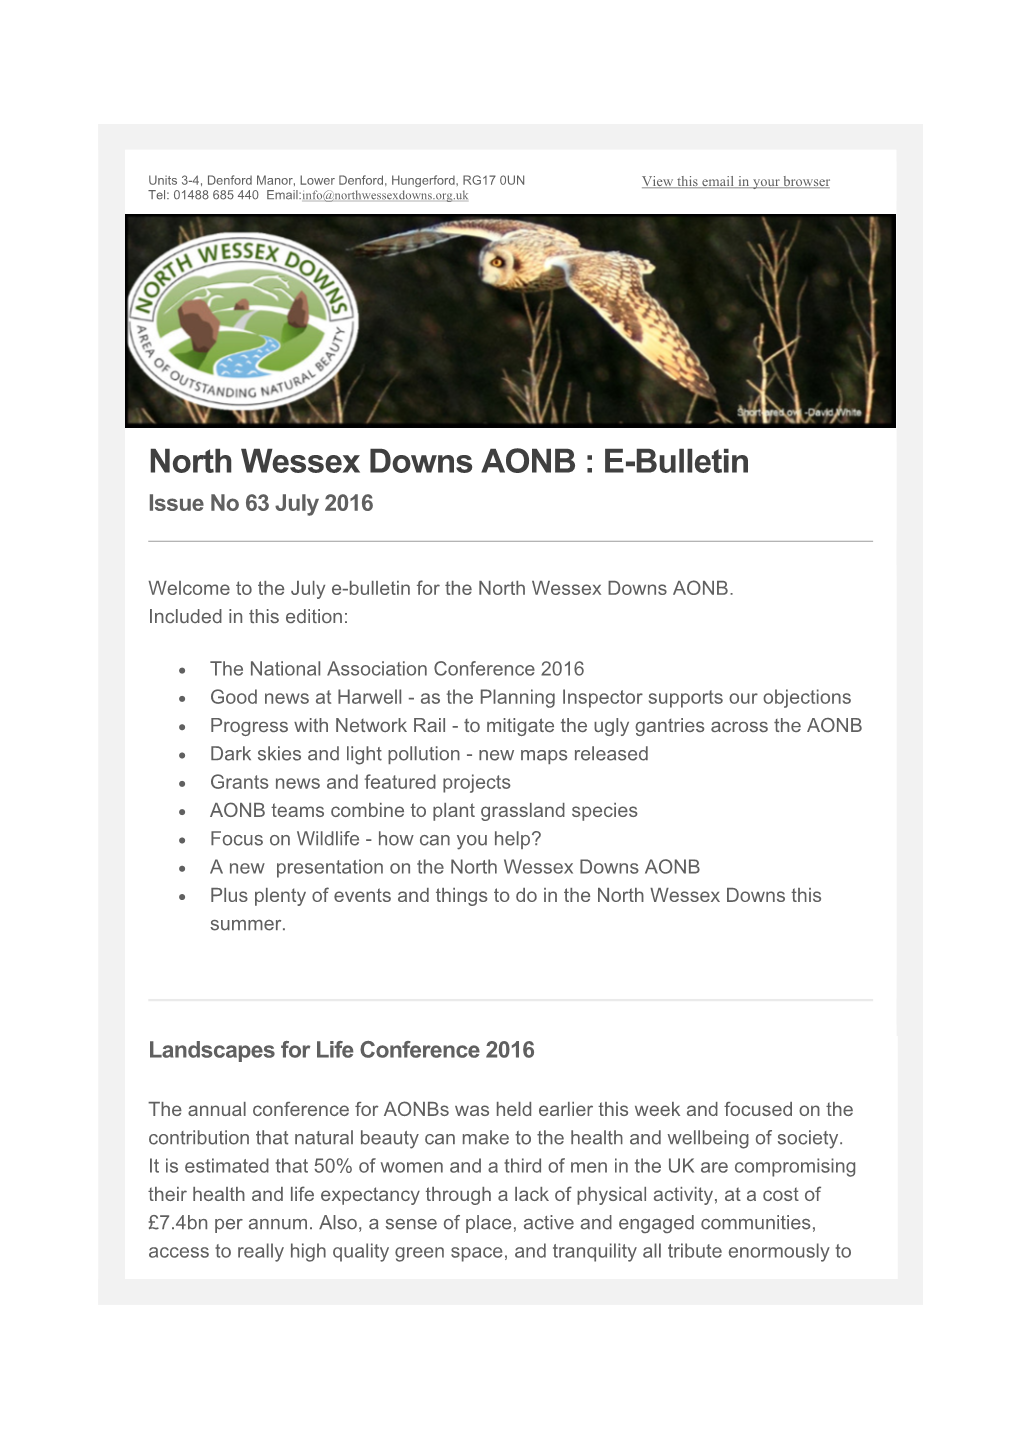 North Wessex Downs AONB : E-Bulletin Issue No 63 July 2016